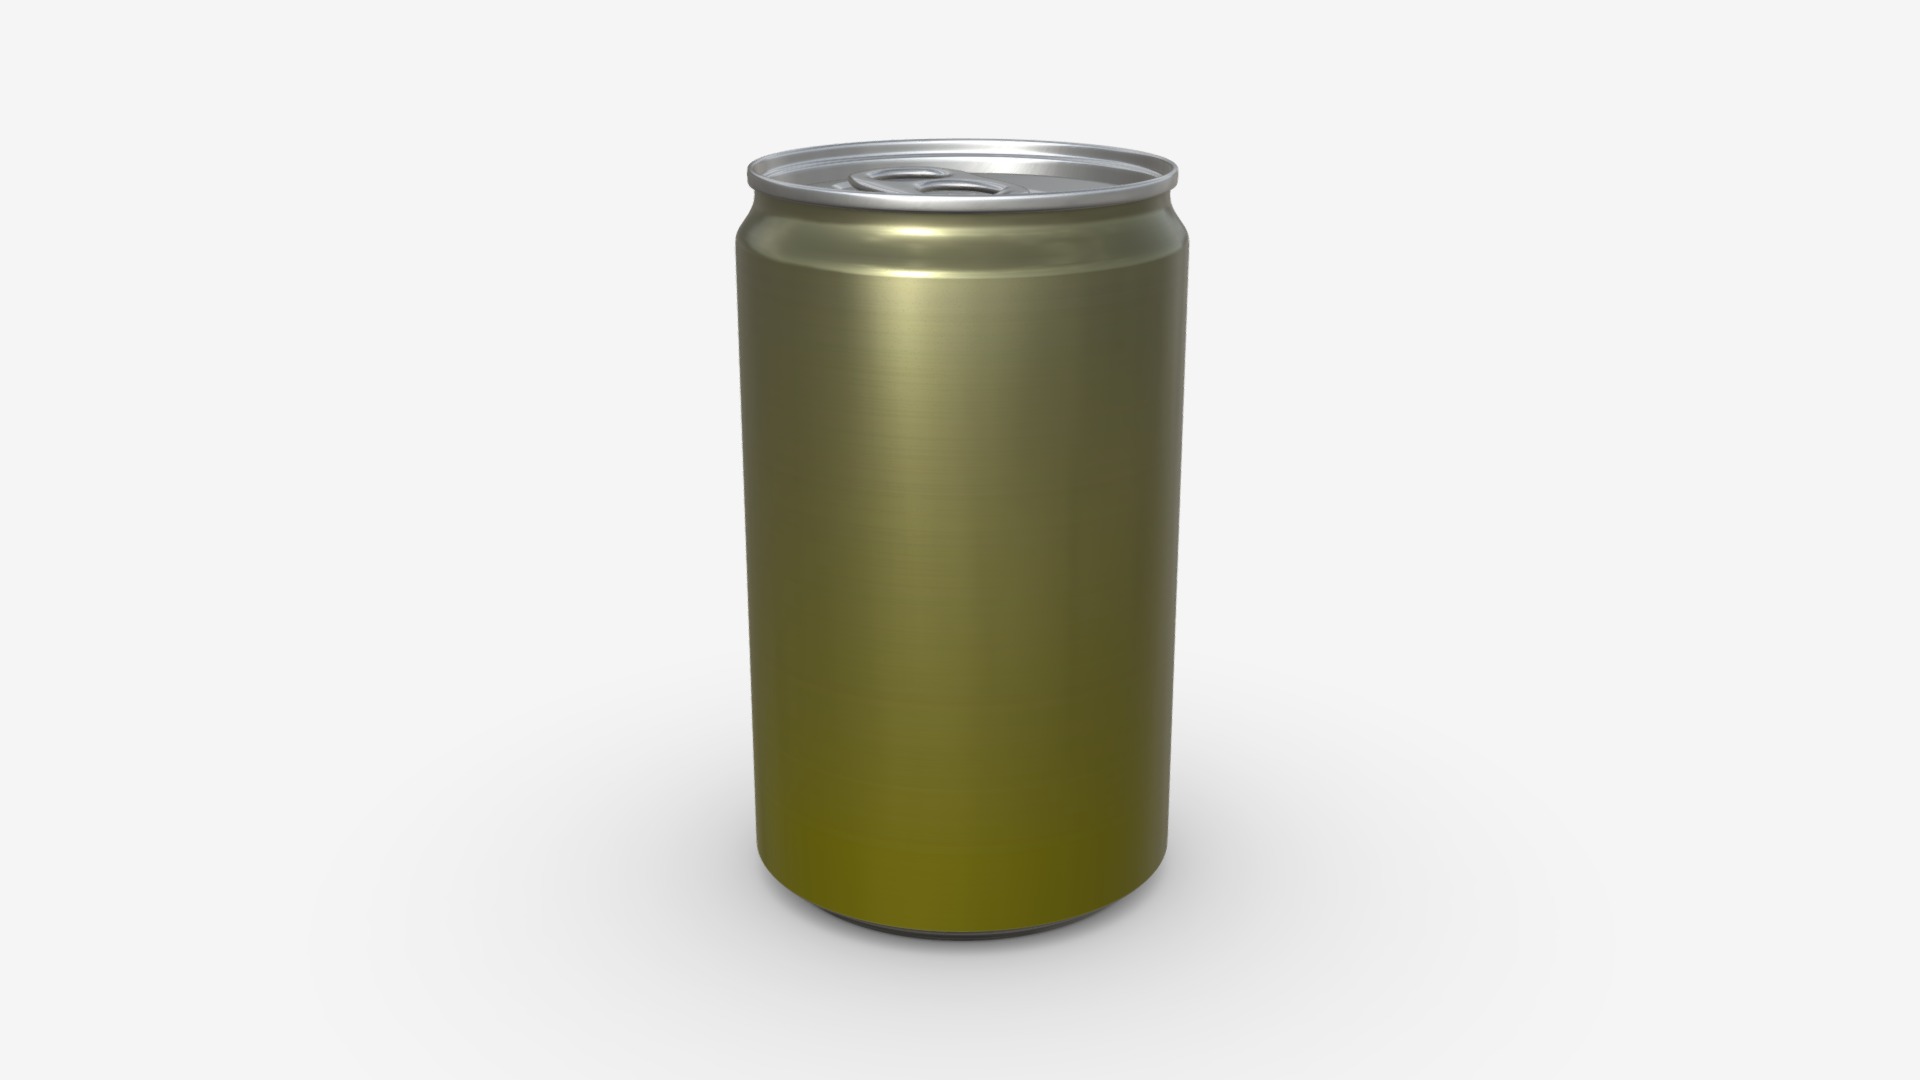 3D model Slim beverage can 150ml 5oz - This is a 3D model of the Slim beverage can 150ml 5oz. The 3D model is about a green cylindrical container.